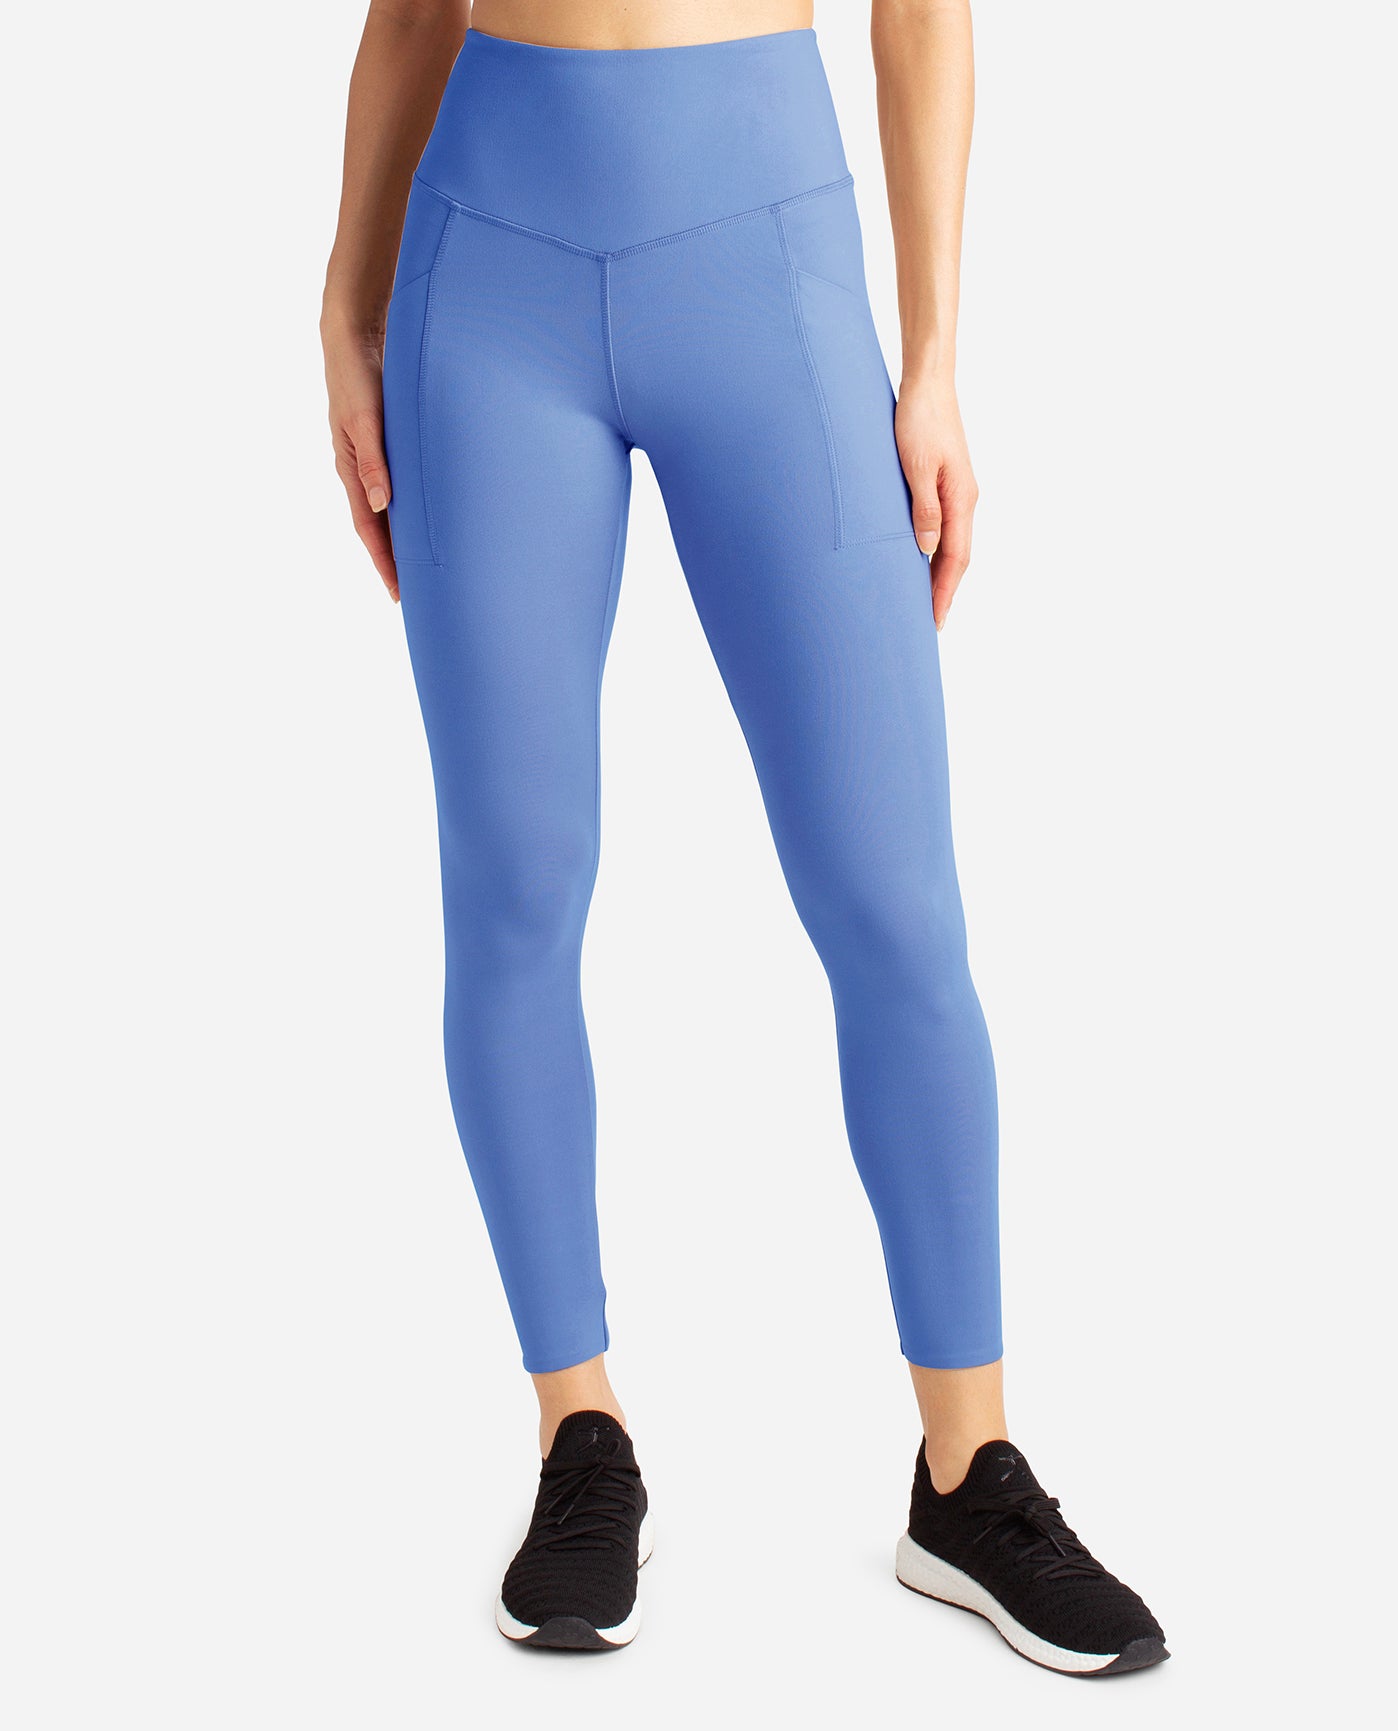 Danskin S leggings Blue and Black with cotton tees, yellow and